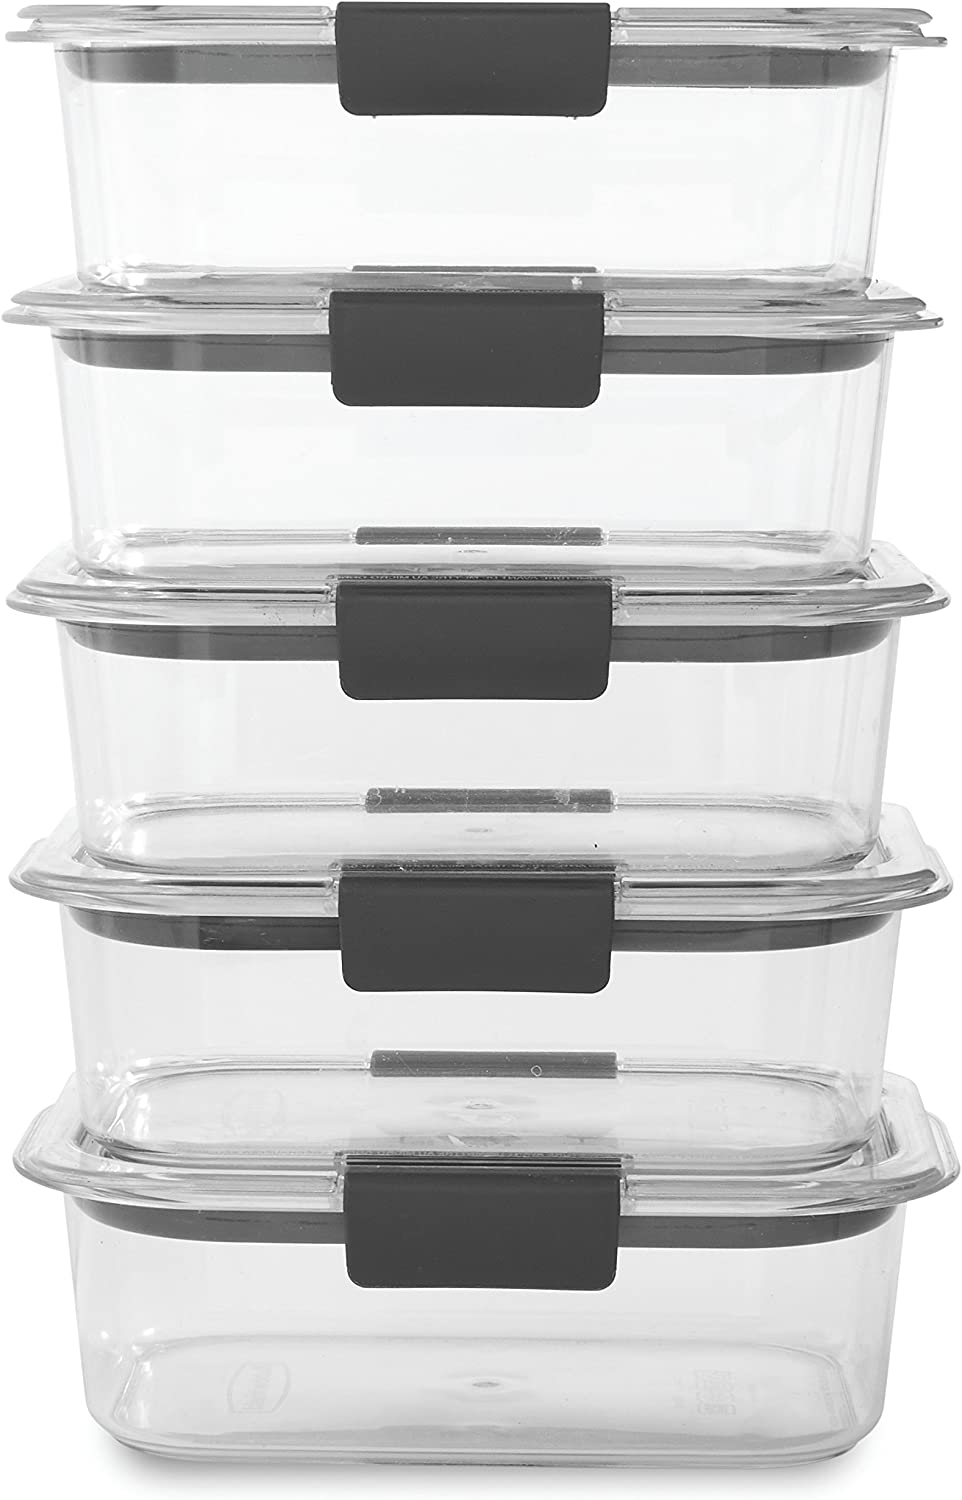 https://discounttoday.net/wp-content/uploads/2022/09/Rubbermaid-10-Piece-Brilliance-Food-Storage-Containers-with-Lids-for-Lunch-Meal-Prep-and-Leftovers-Dishwasher-Safe-3.2-Cup-Clear-Grey.jpg